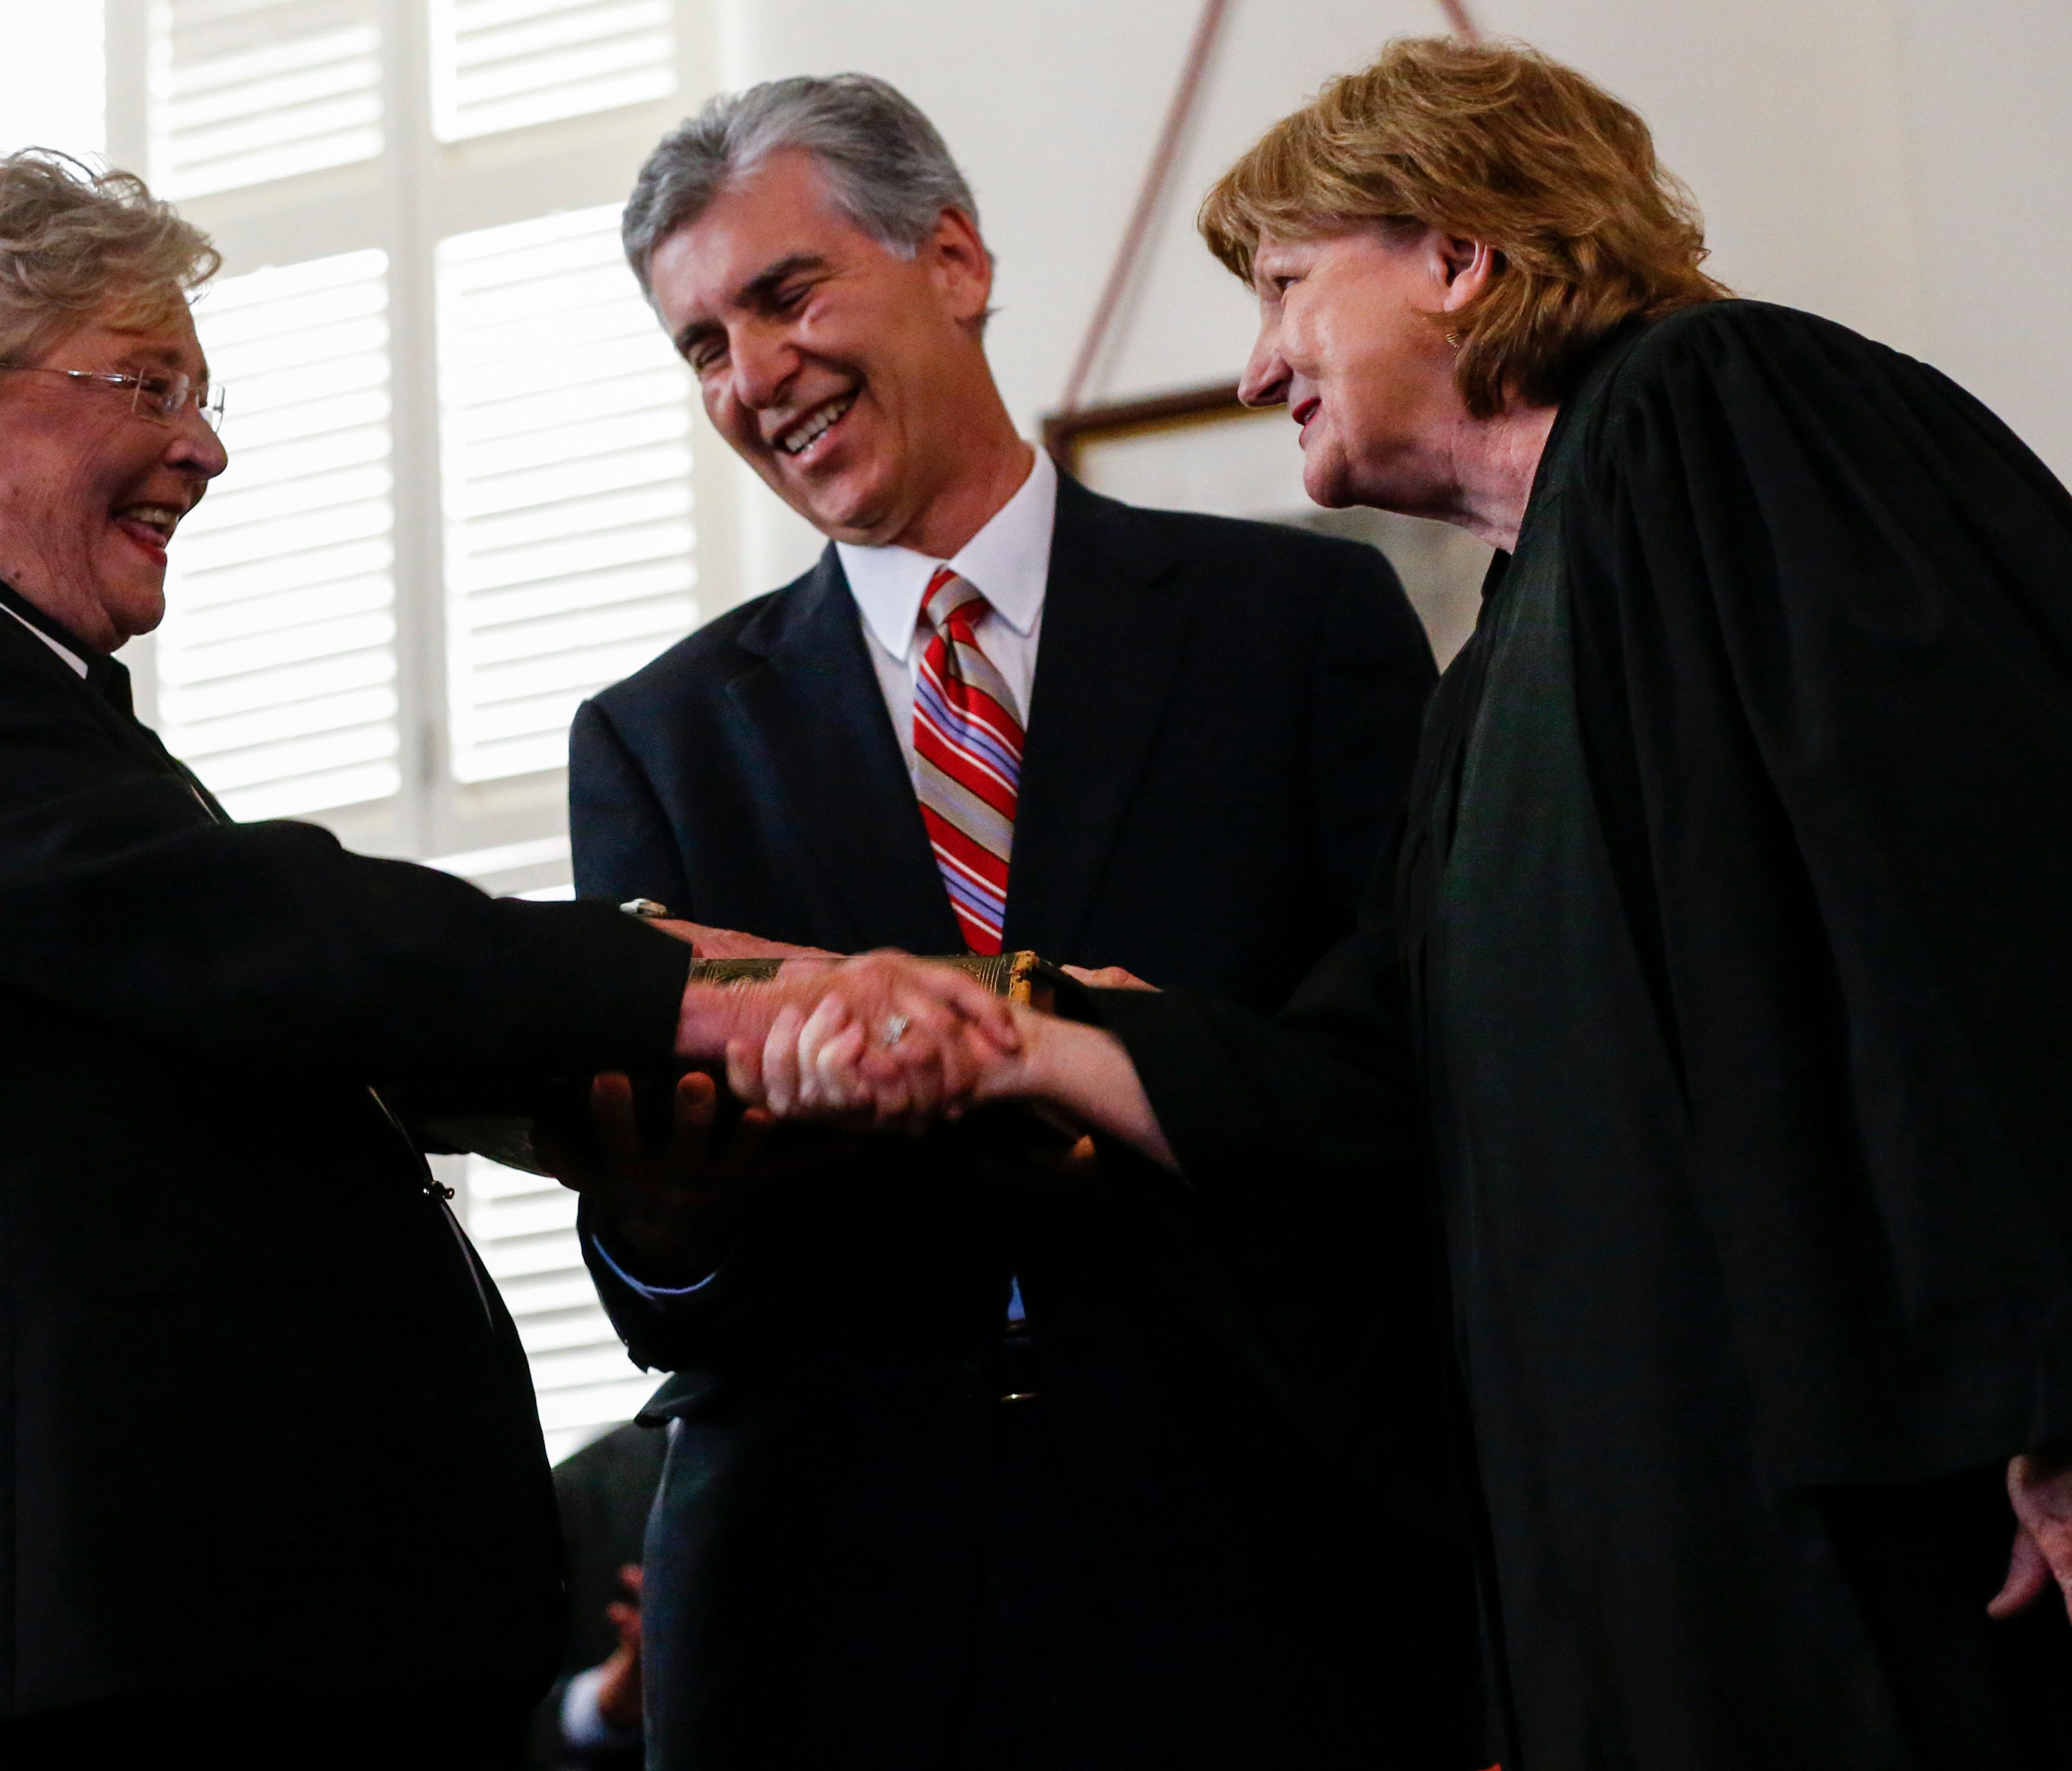 Acting Chief Justice, Lyn Stuart (right), congratulates Kay Ivey (left) after she is sworn in as Governor of Alabama.